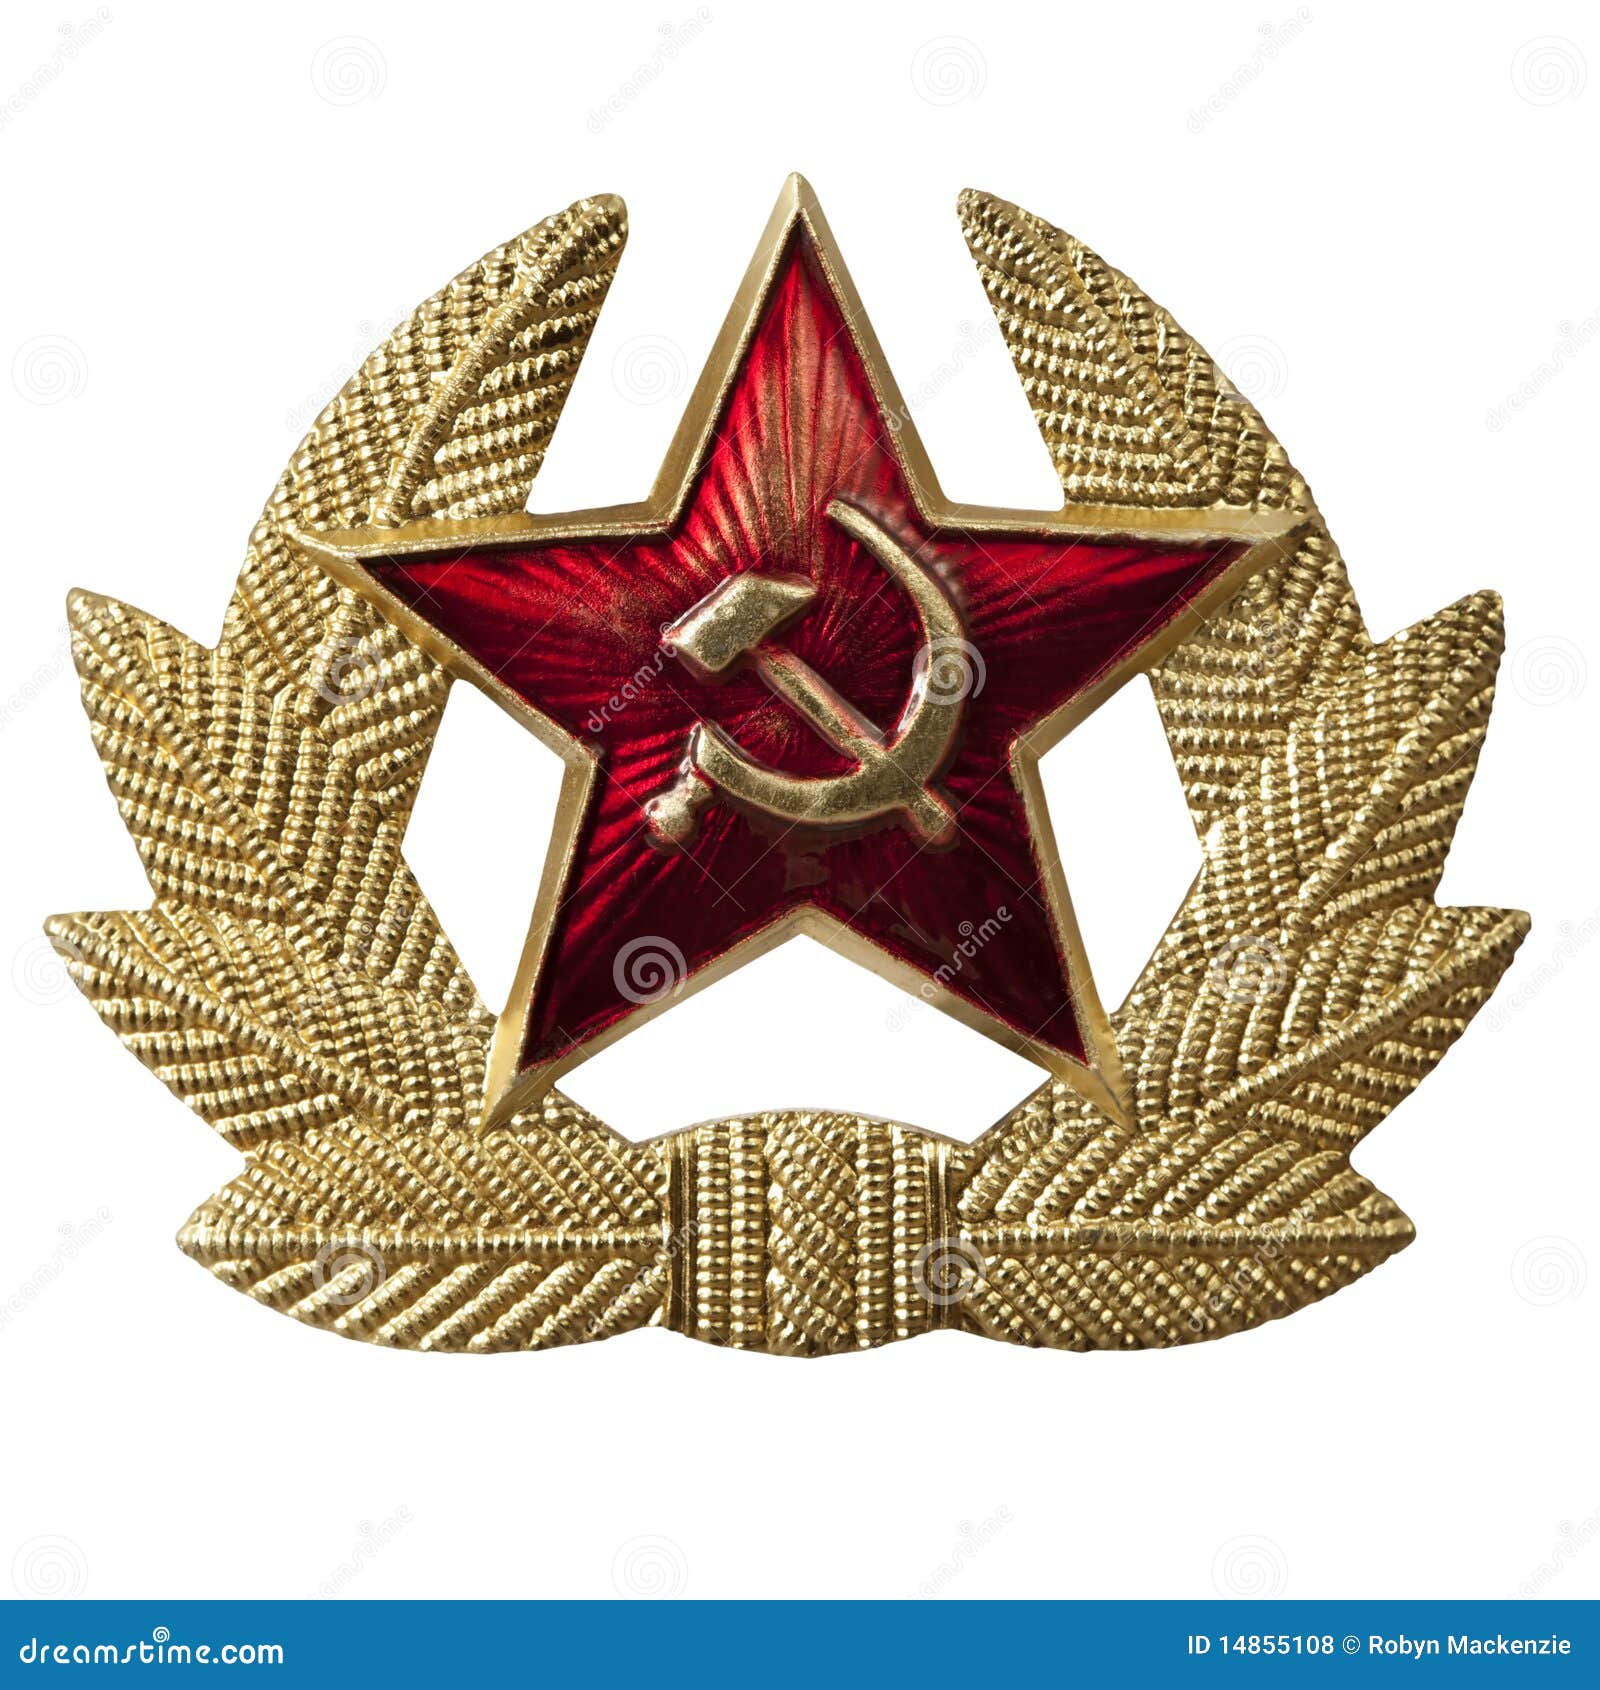 hammer and sickle badge